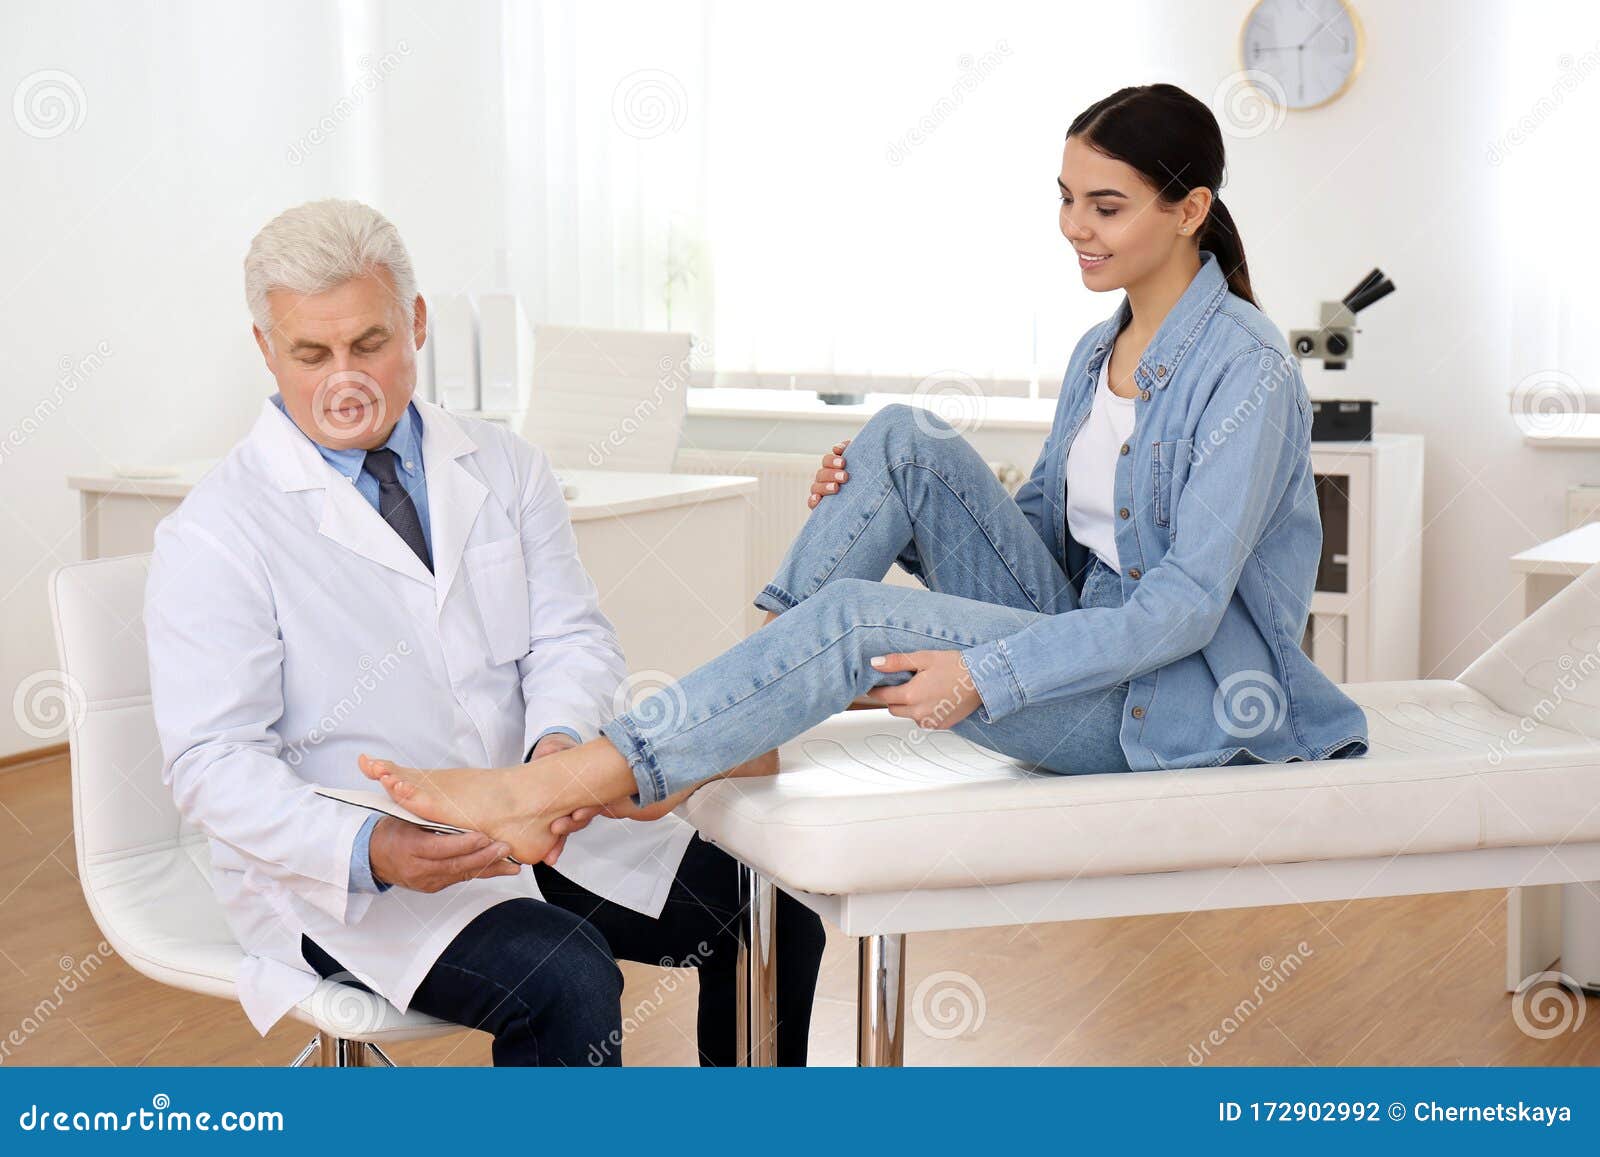 male orthopedist fitting insole on patient`s foot